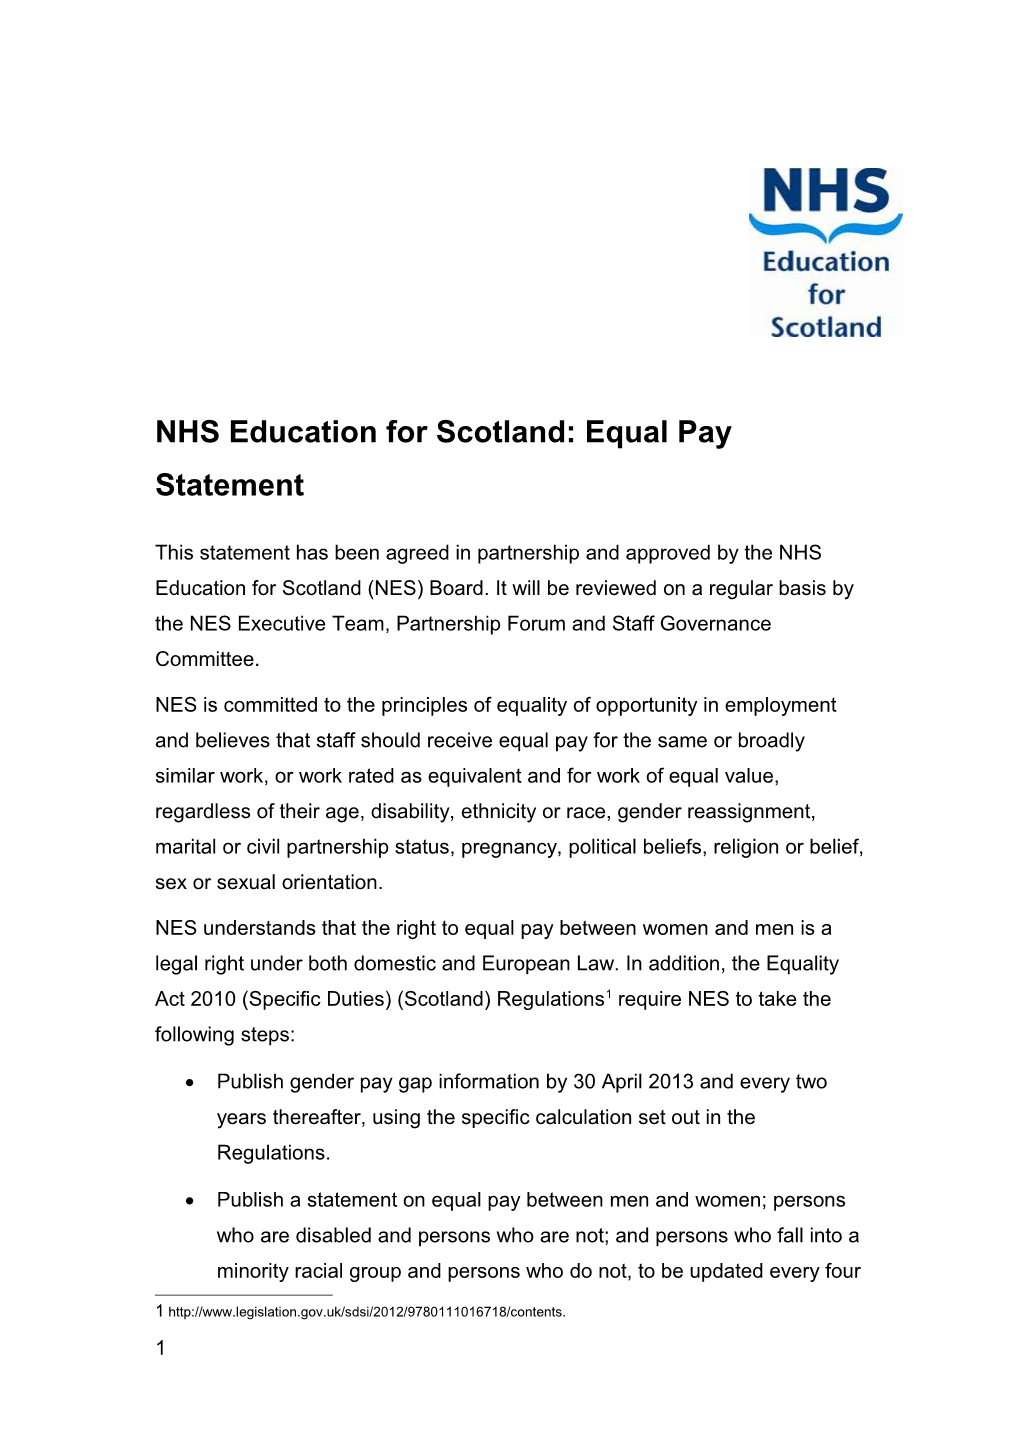 NHS Education for Scotland: Equal Pay Statement